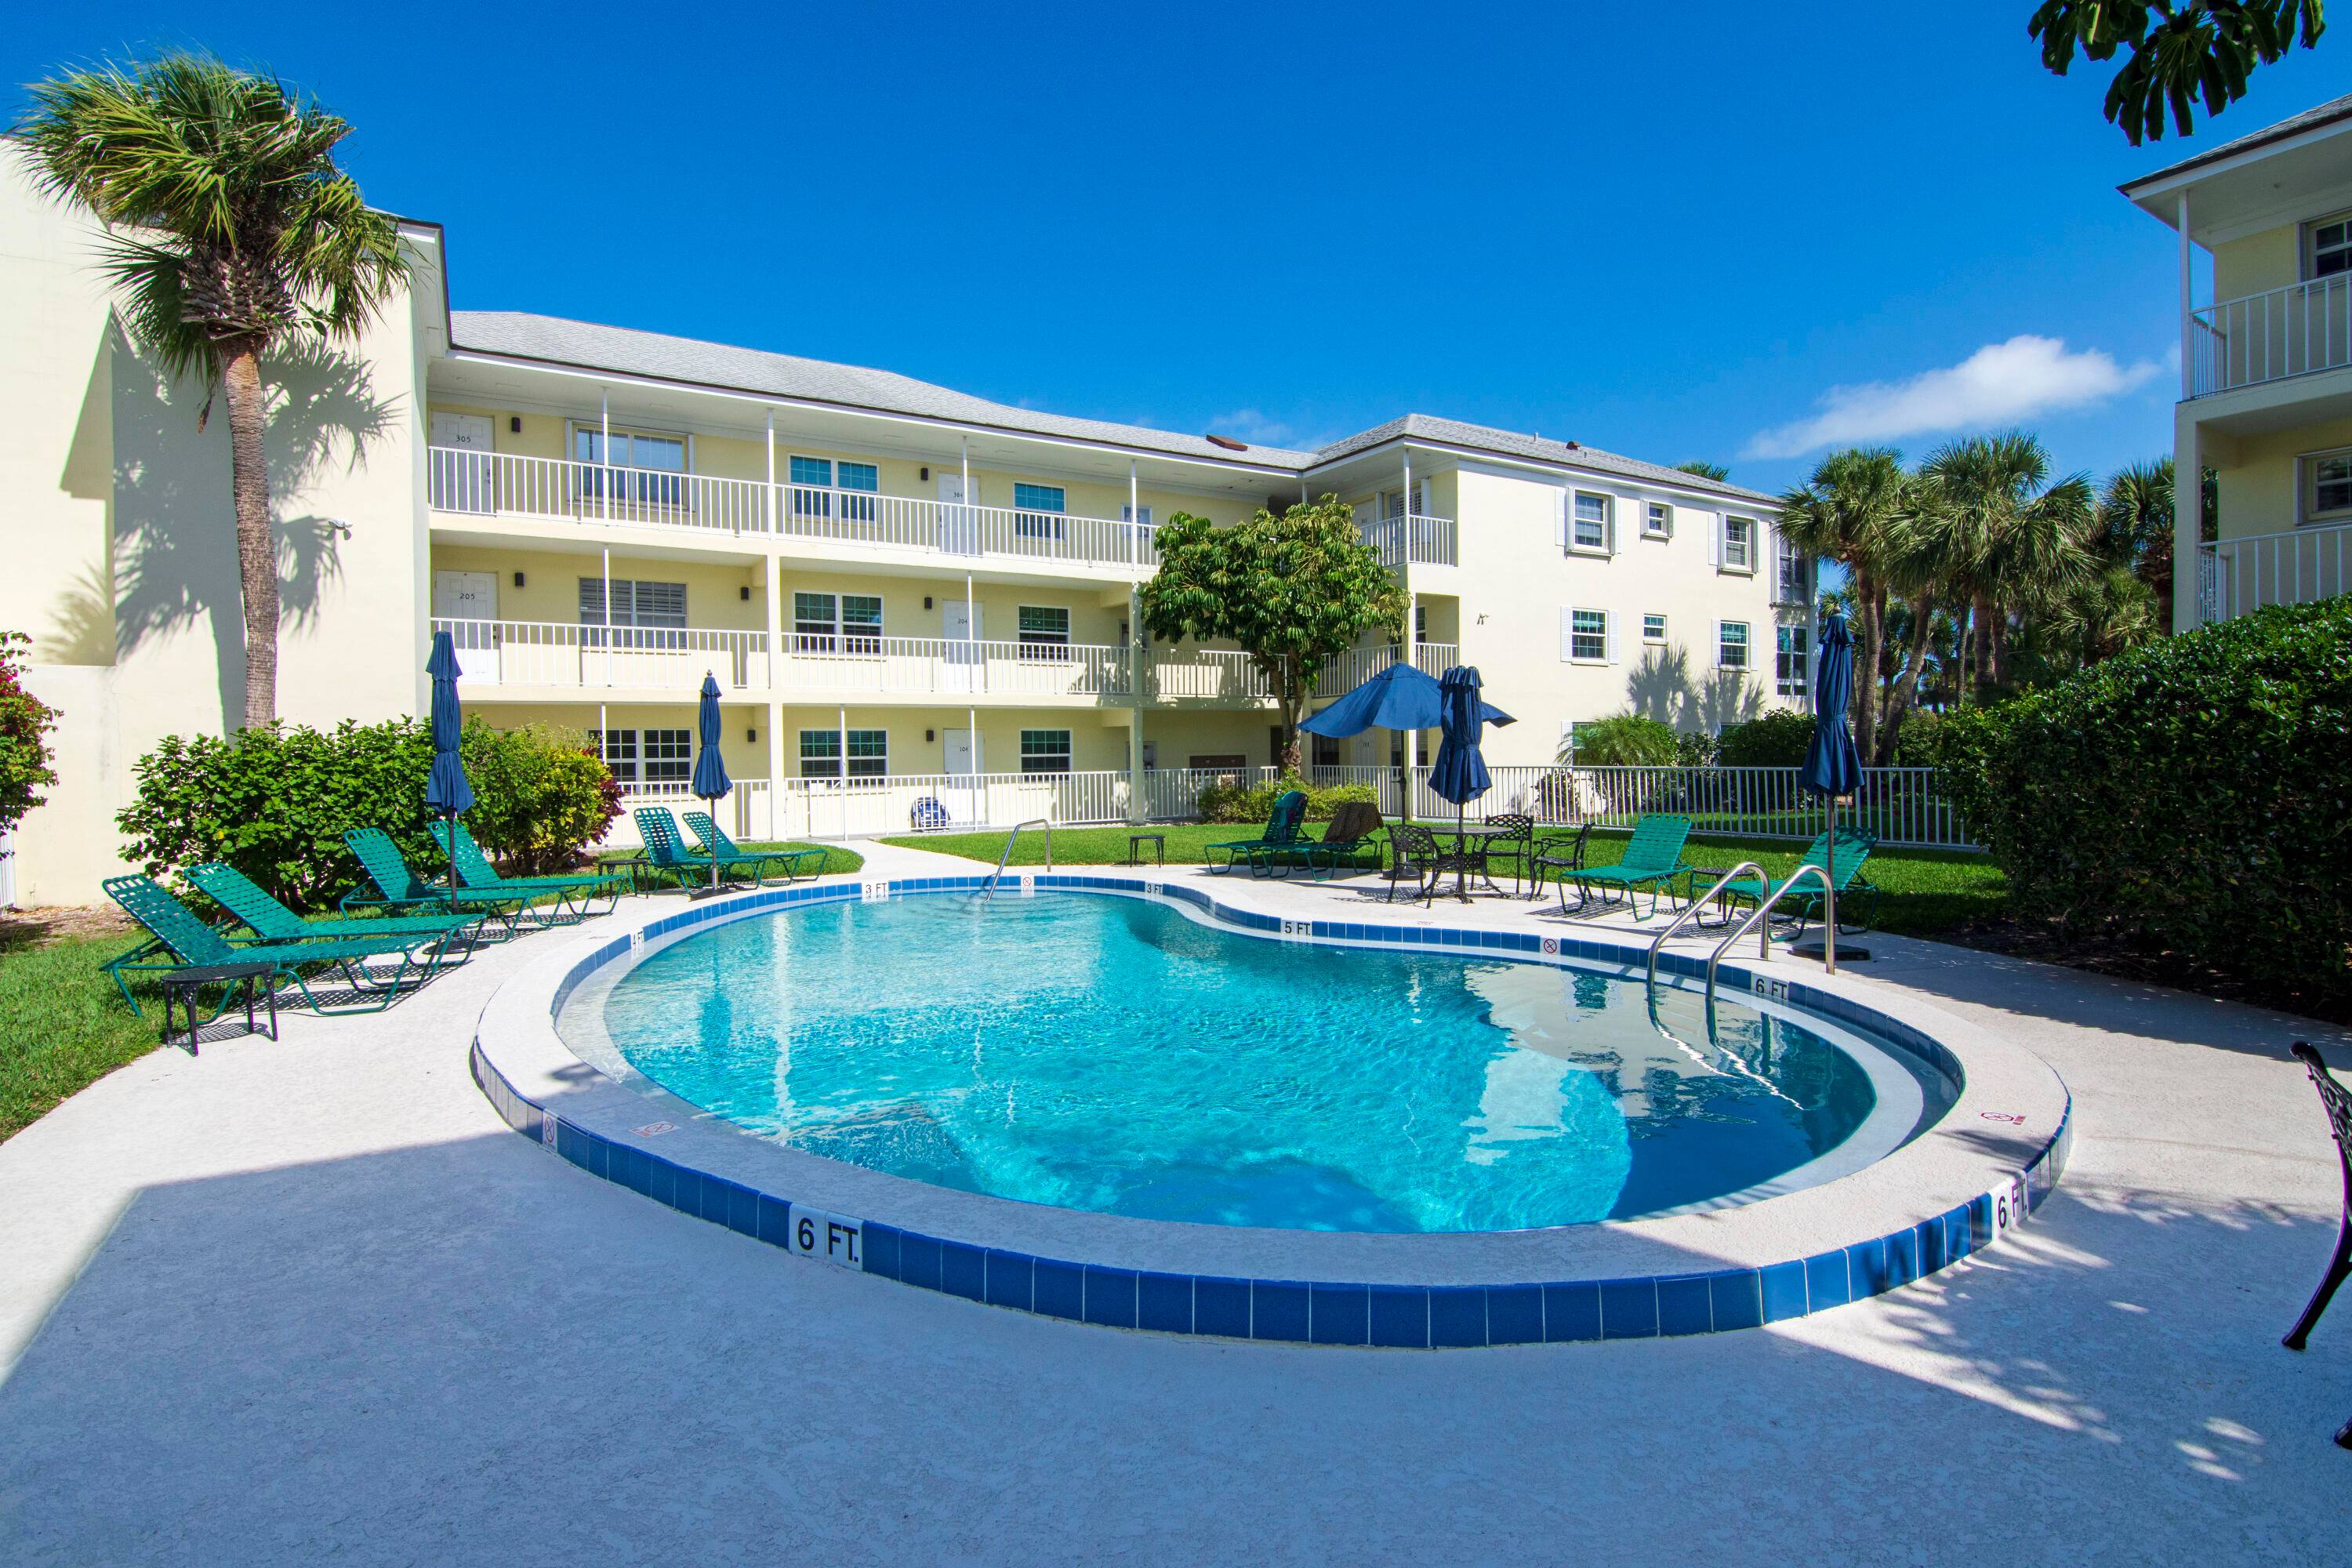 This condo is yards away from the beach and walking distance to some of the best restaurants in Vero Beach.